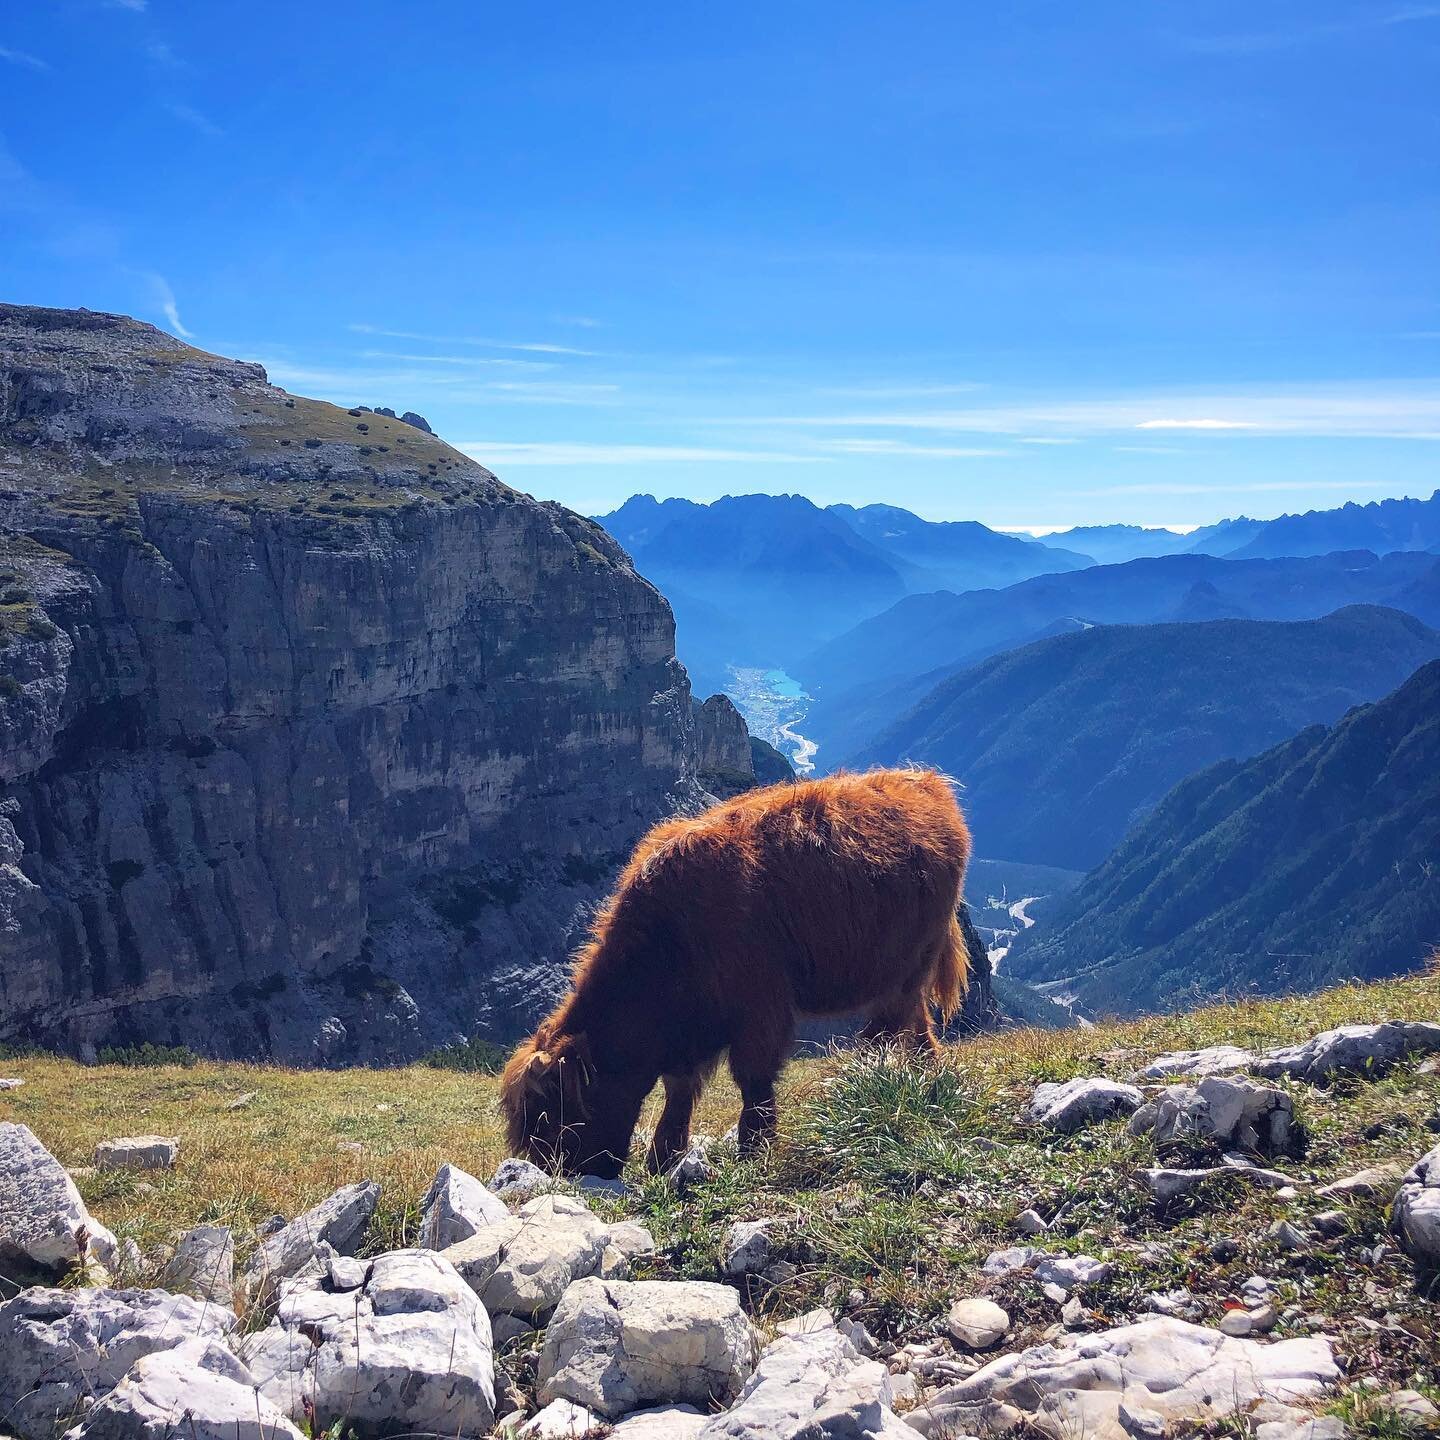 Oh, to be a cow precariously eating grass on a cliffside of the Dolomites! The ultimate dream!

// #dolomites #hikingadventures #hikersofinstagram #trecimedilavaredo #hikerlife #hikingtheglobe